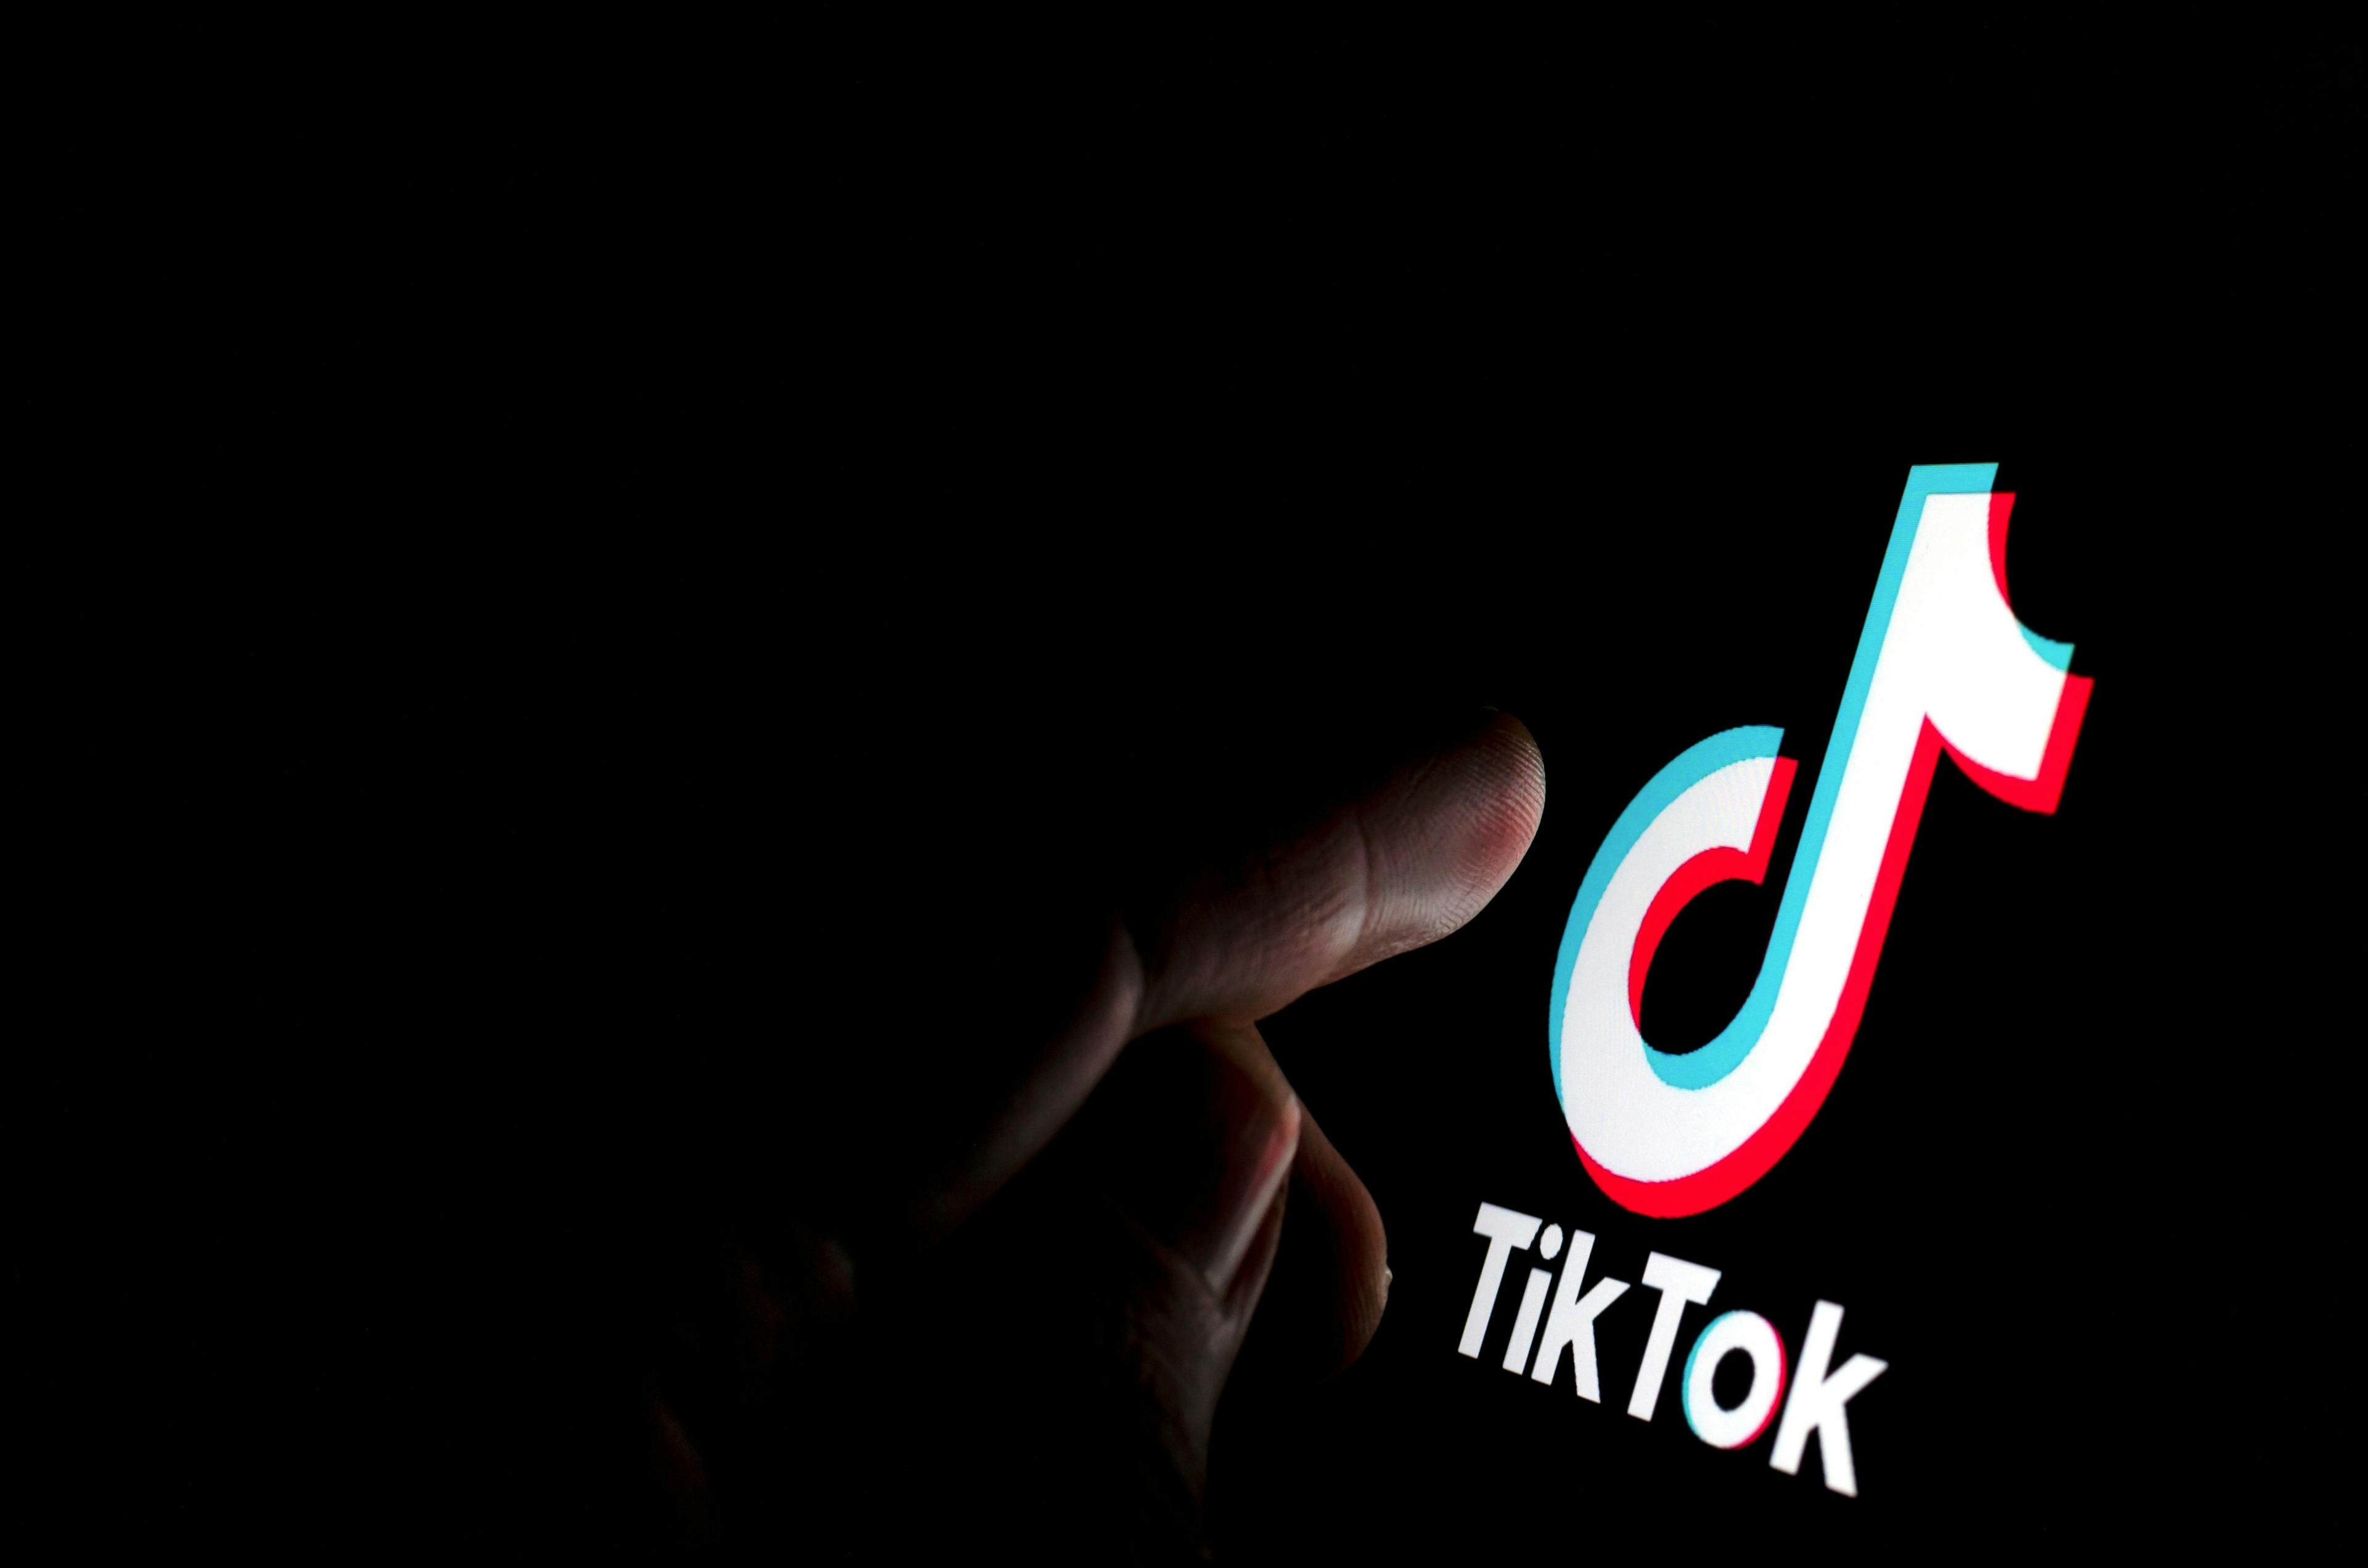 Popular Hypertension-related Videos on TikTok Often Not Backed by Medical Literature, Found New Study